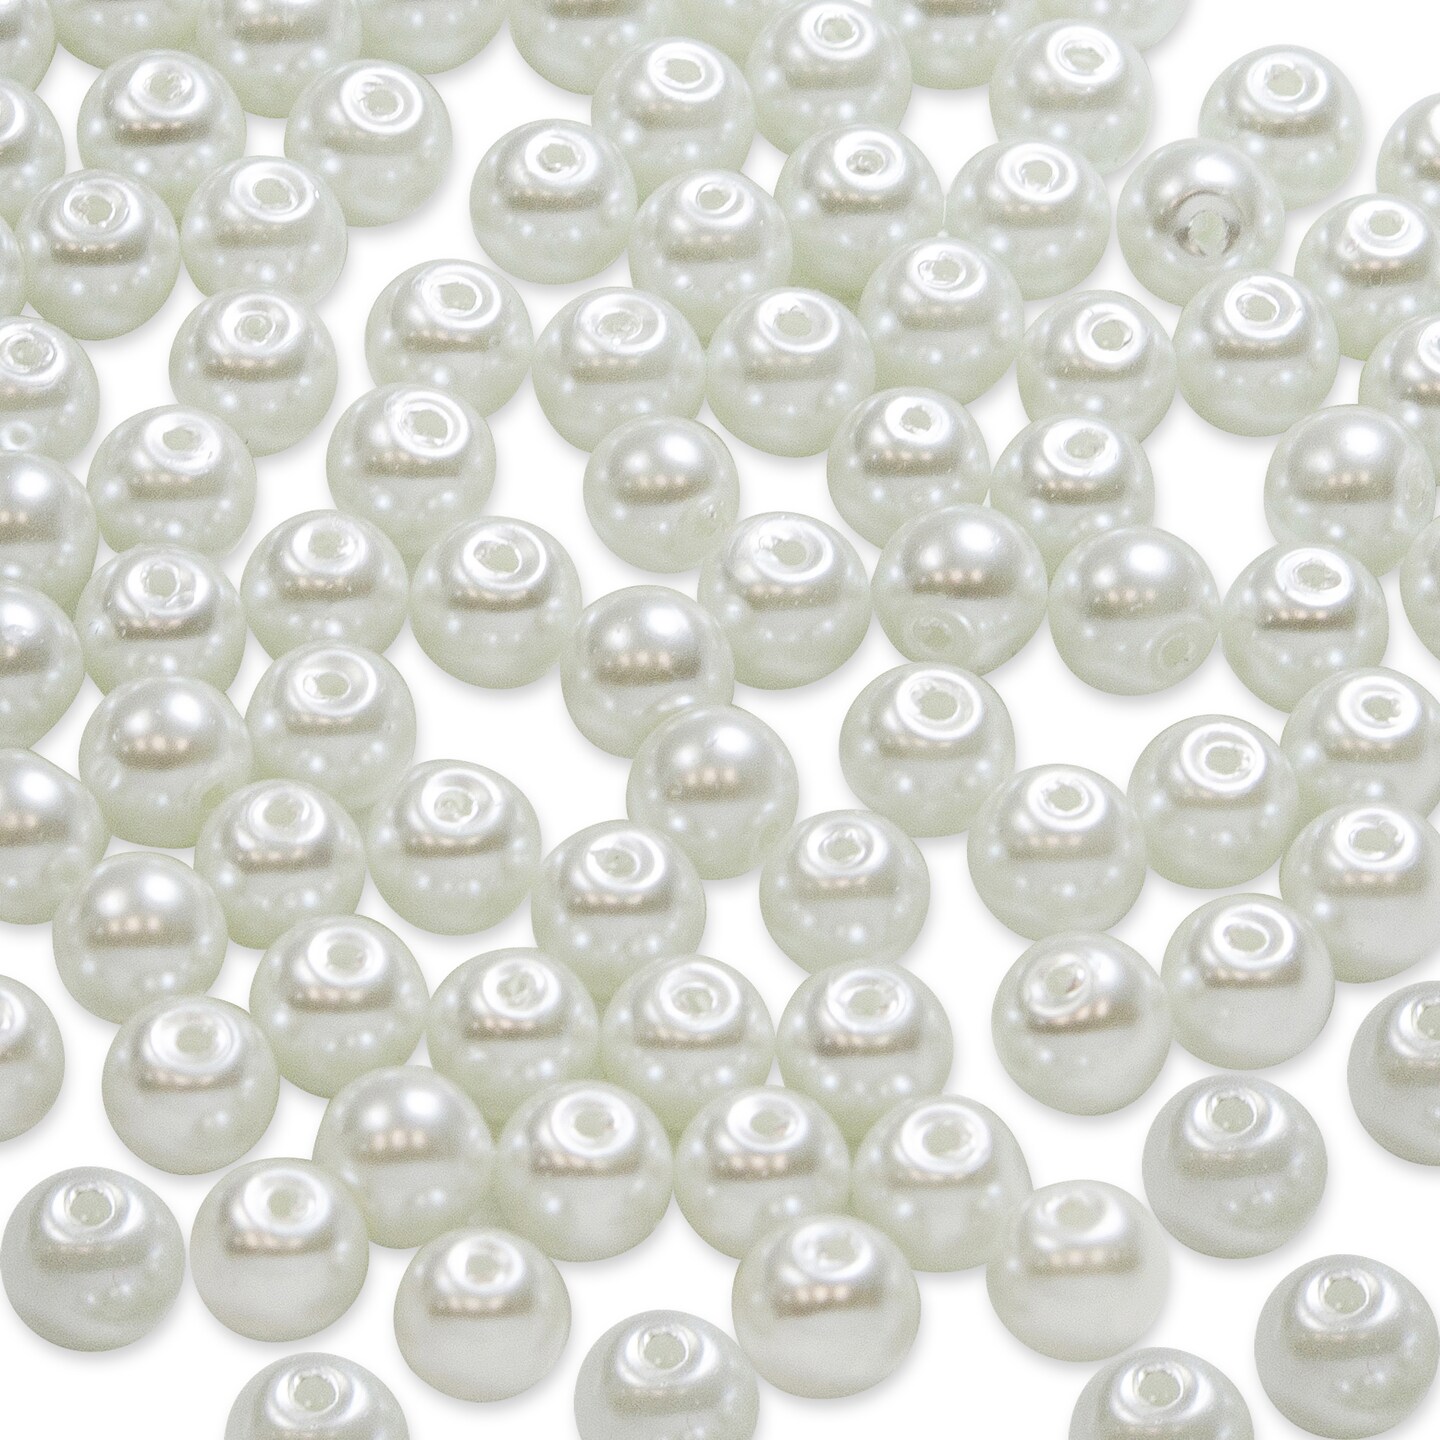 8mm Ivory Glass Pearl Beads - 100 on 30-Inch Strand